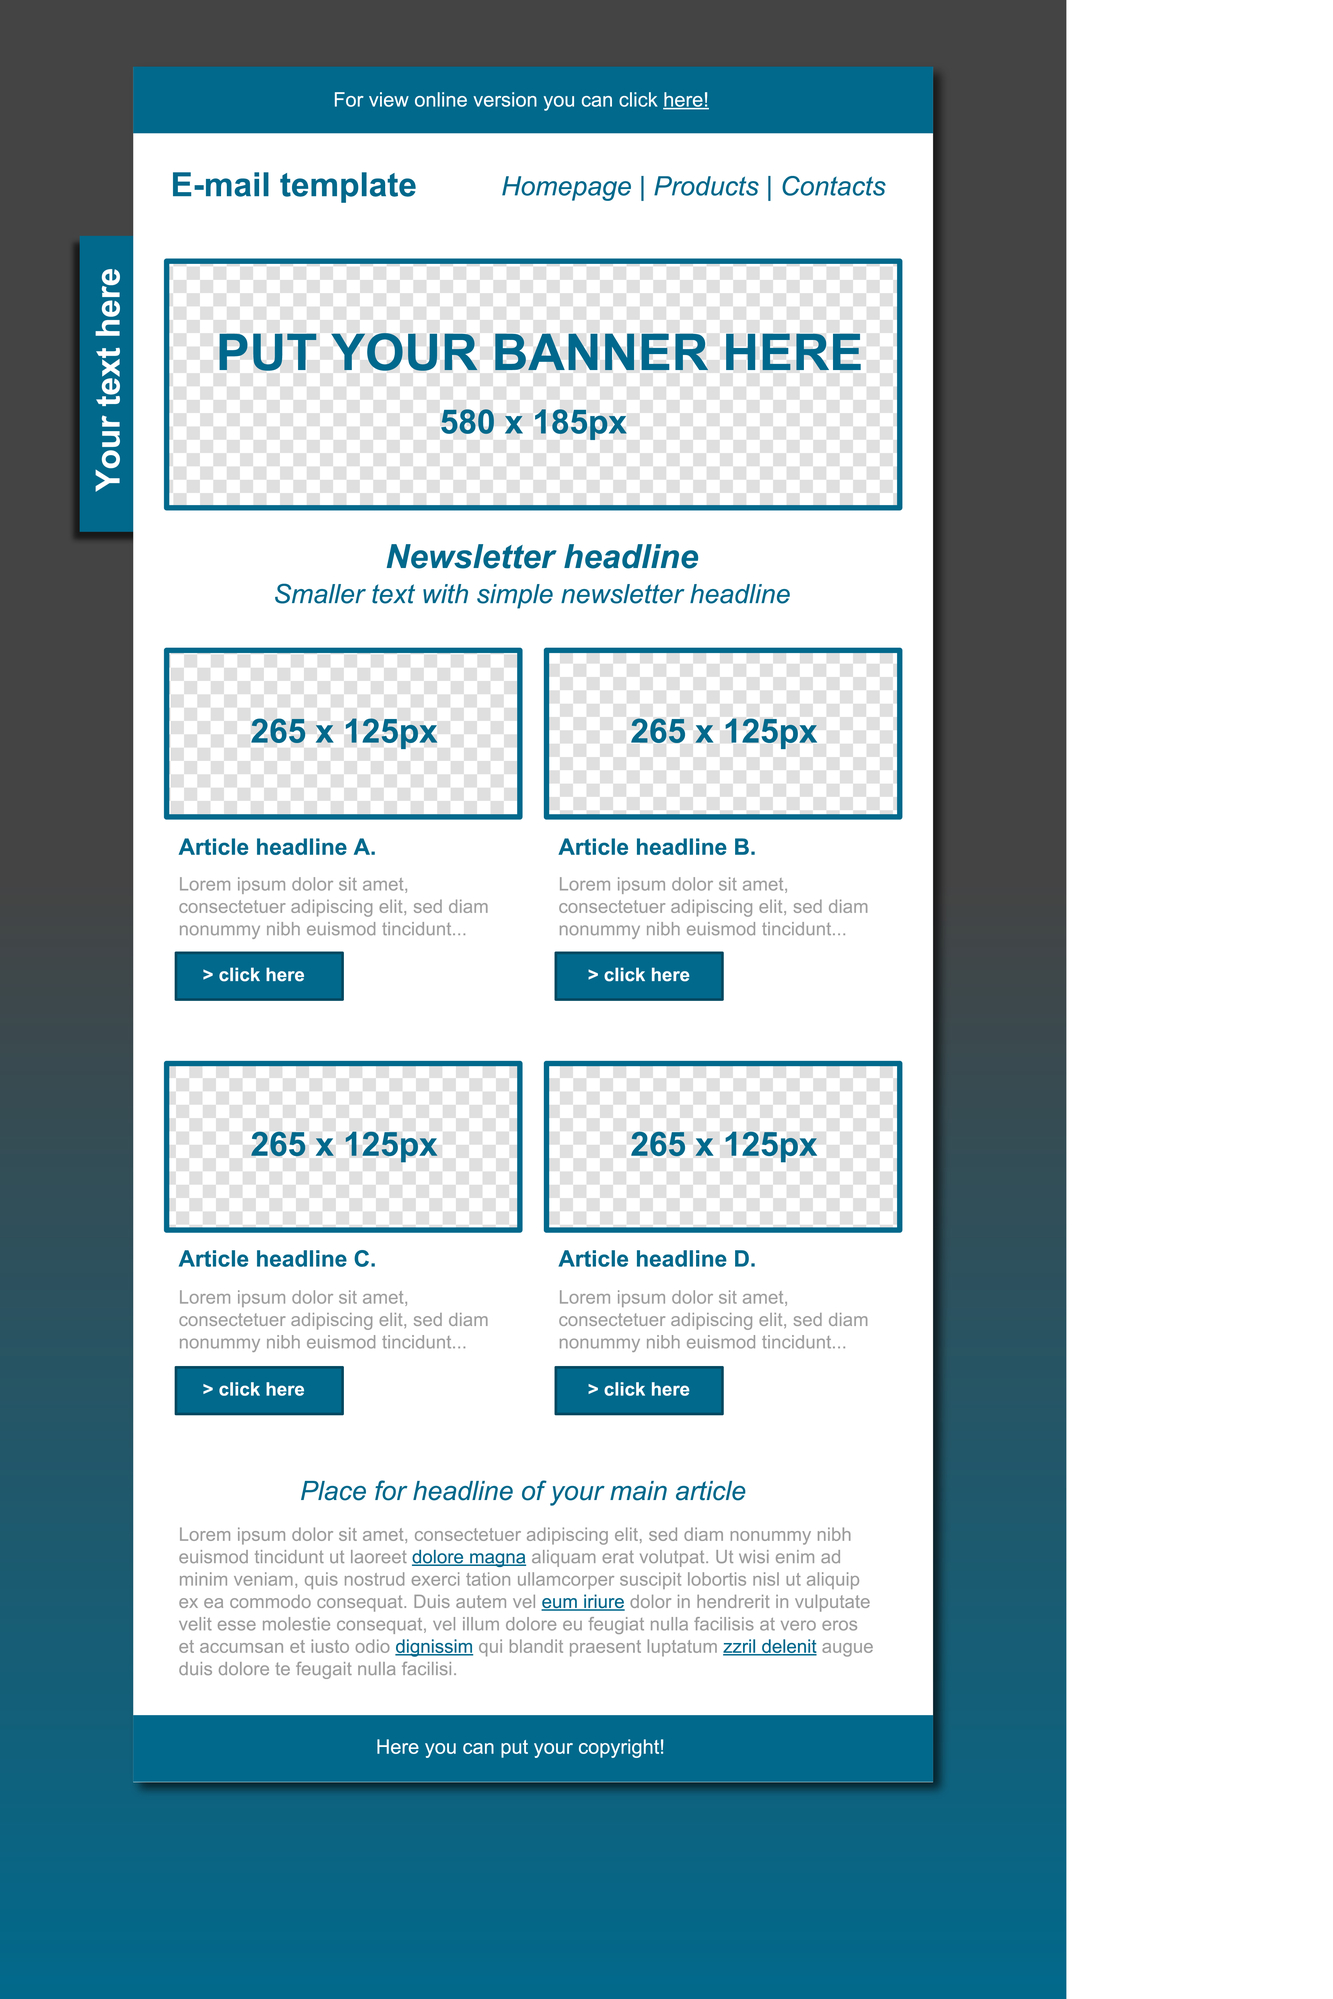 Responsive Email Template For Building An Email Newsletter For A Commercial Contracting Business